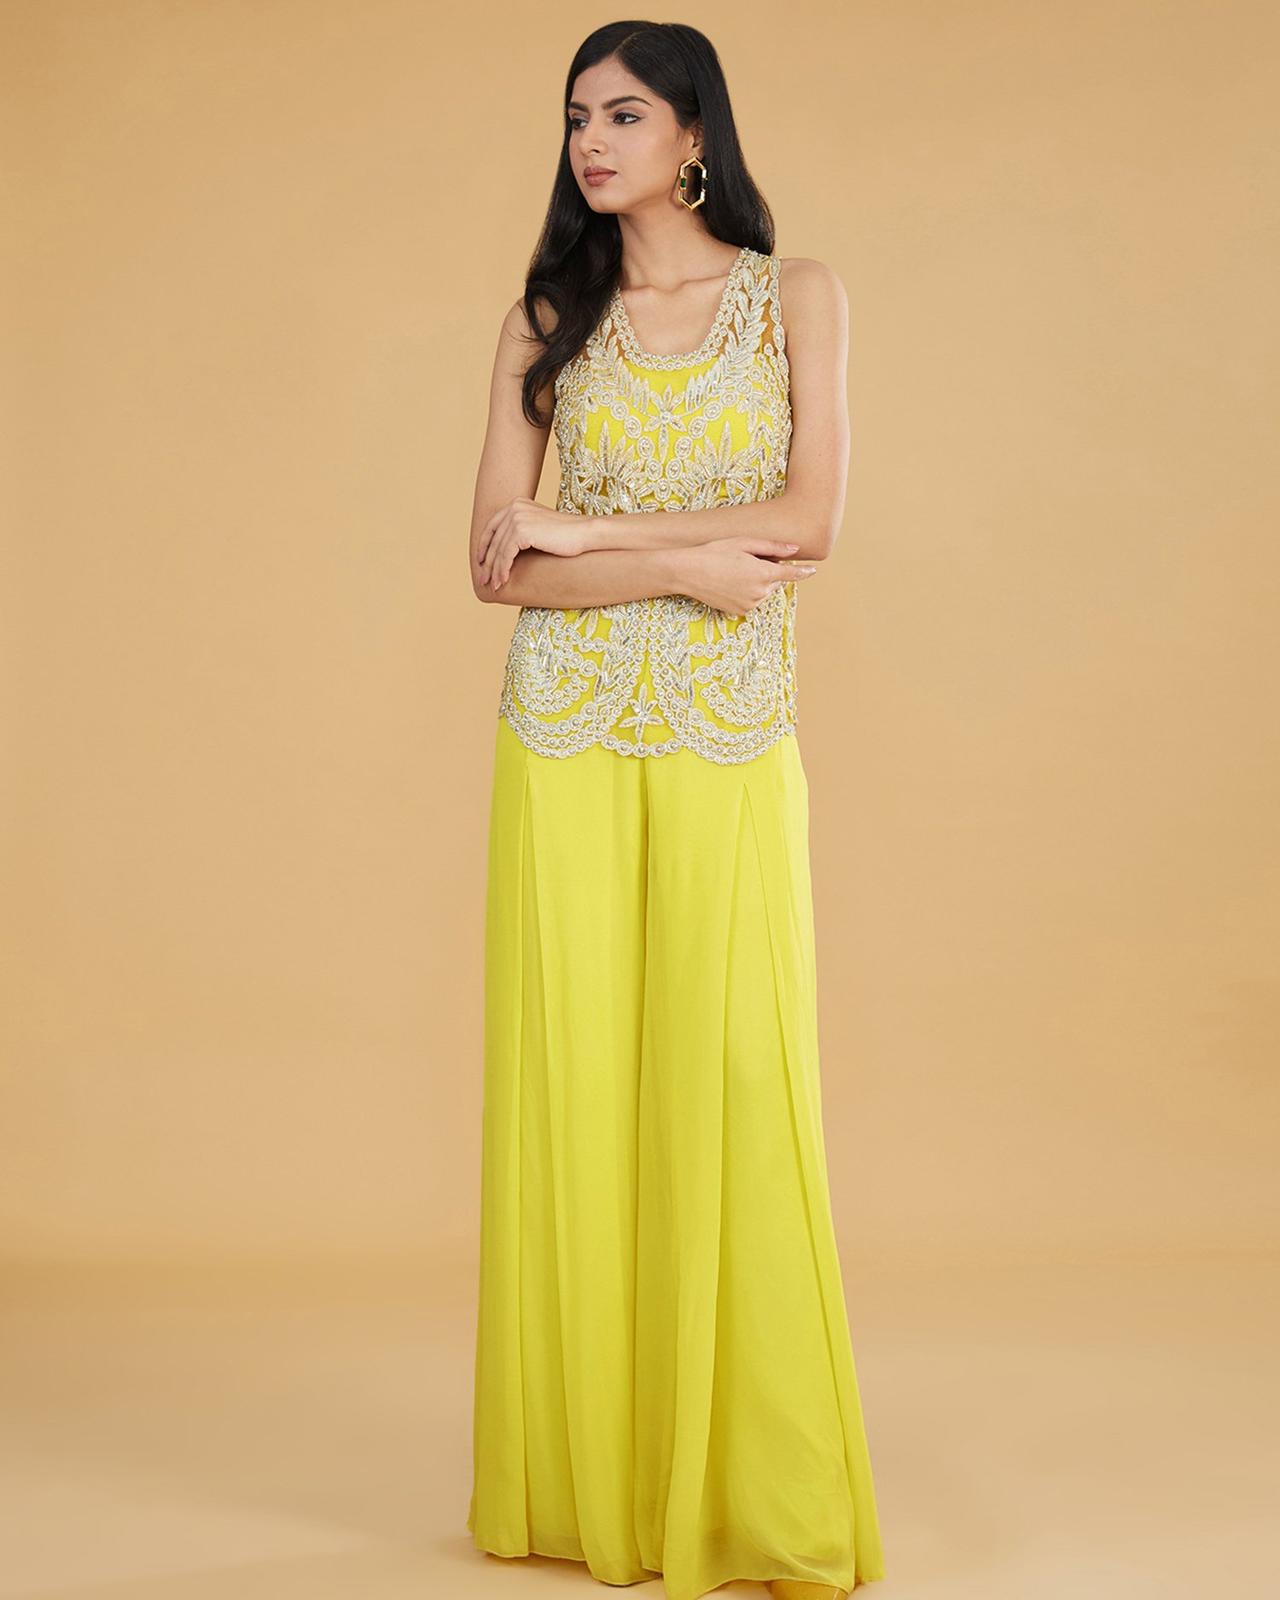 Yellow maxi dress with Multicolor tassel for haldi function | Dress for  haldi function, Yellow maxi dress, Yellow dress for haldi function